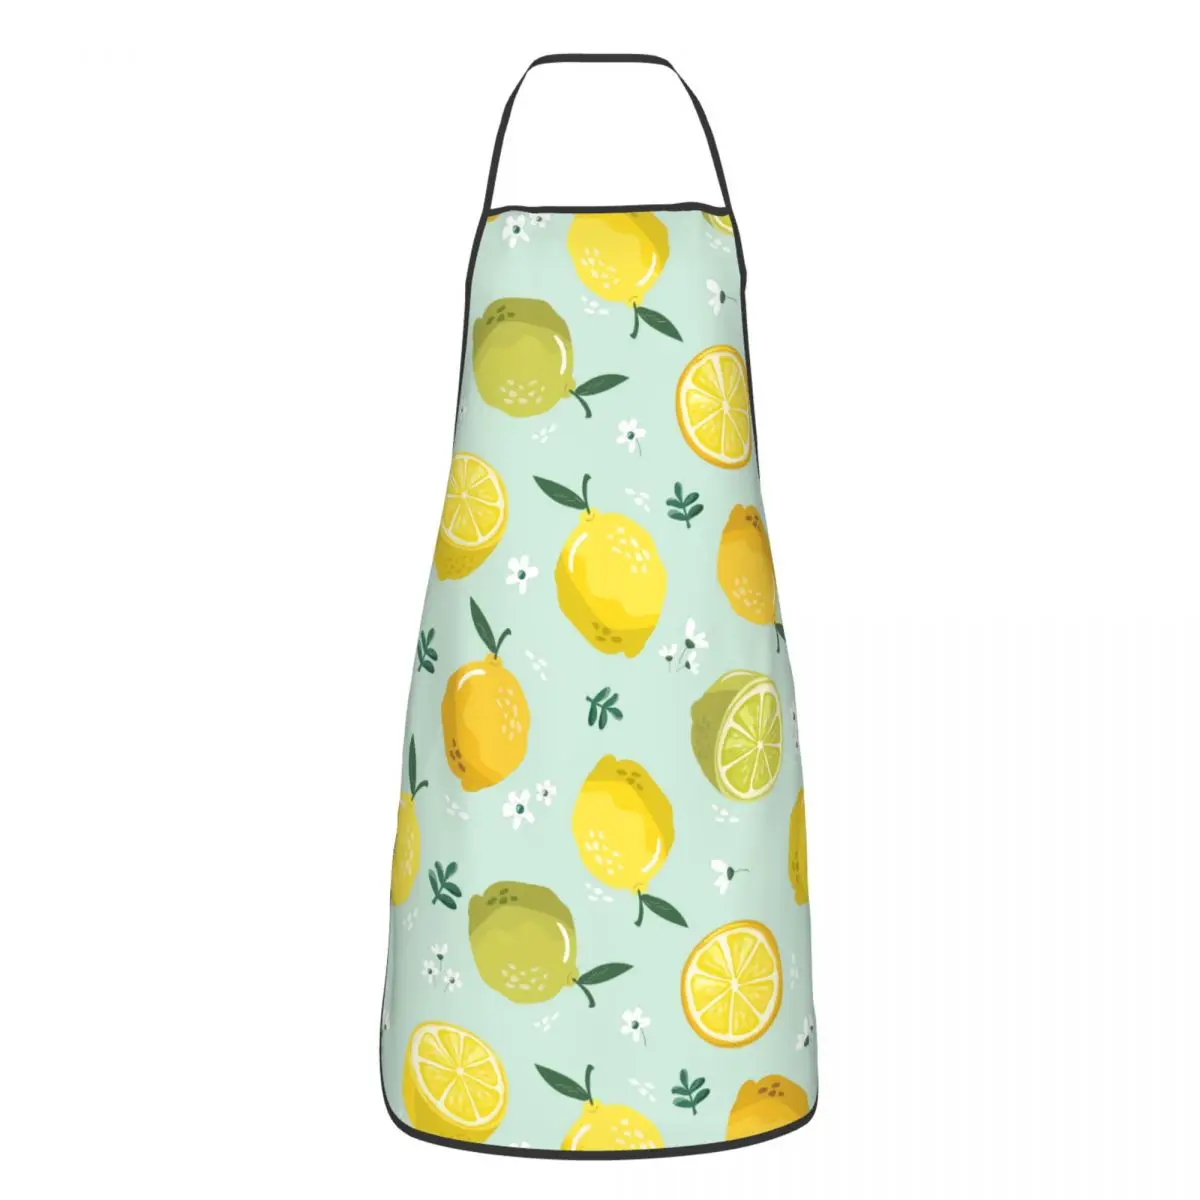 

Lemon Flower Apron Cuisine Cooking Baking Household Cleaning Gardening Cute Fruit Pattern Aprons Cafe Waterproof Pinafore Chef